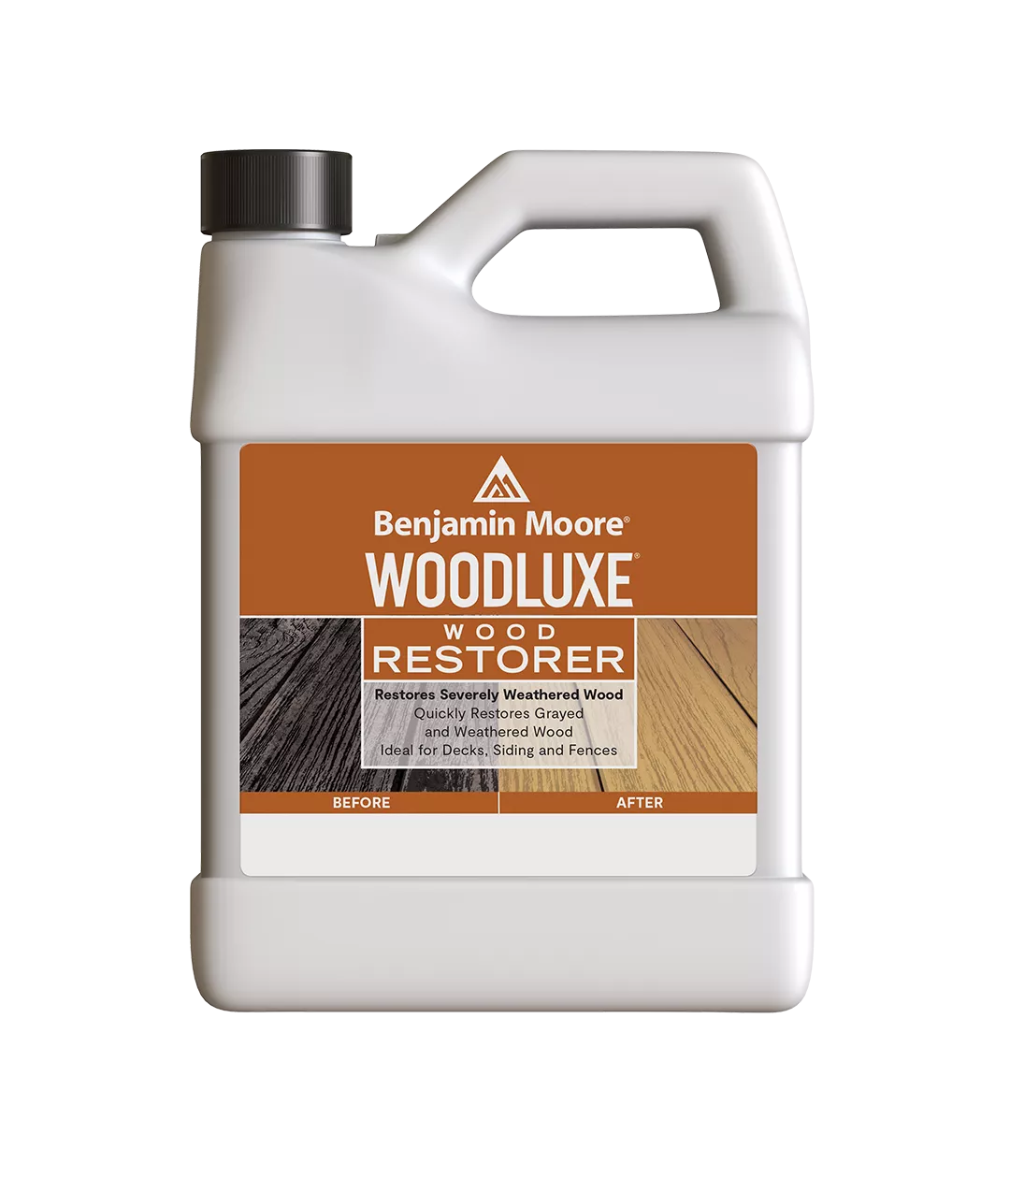 Benjamin Moore Woodluxe Wood Restorer Gallon available at Southwestern Paint.